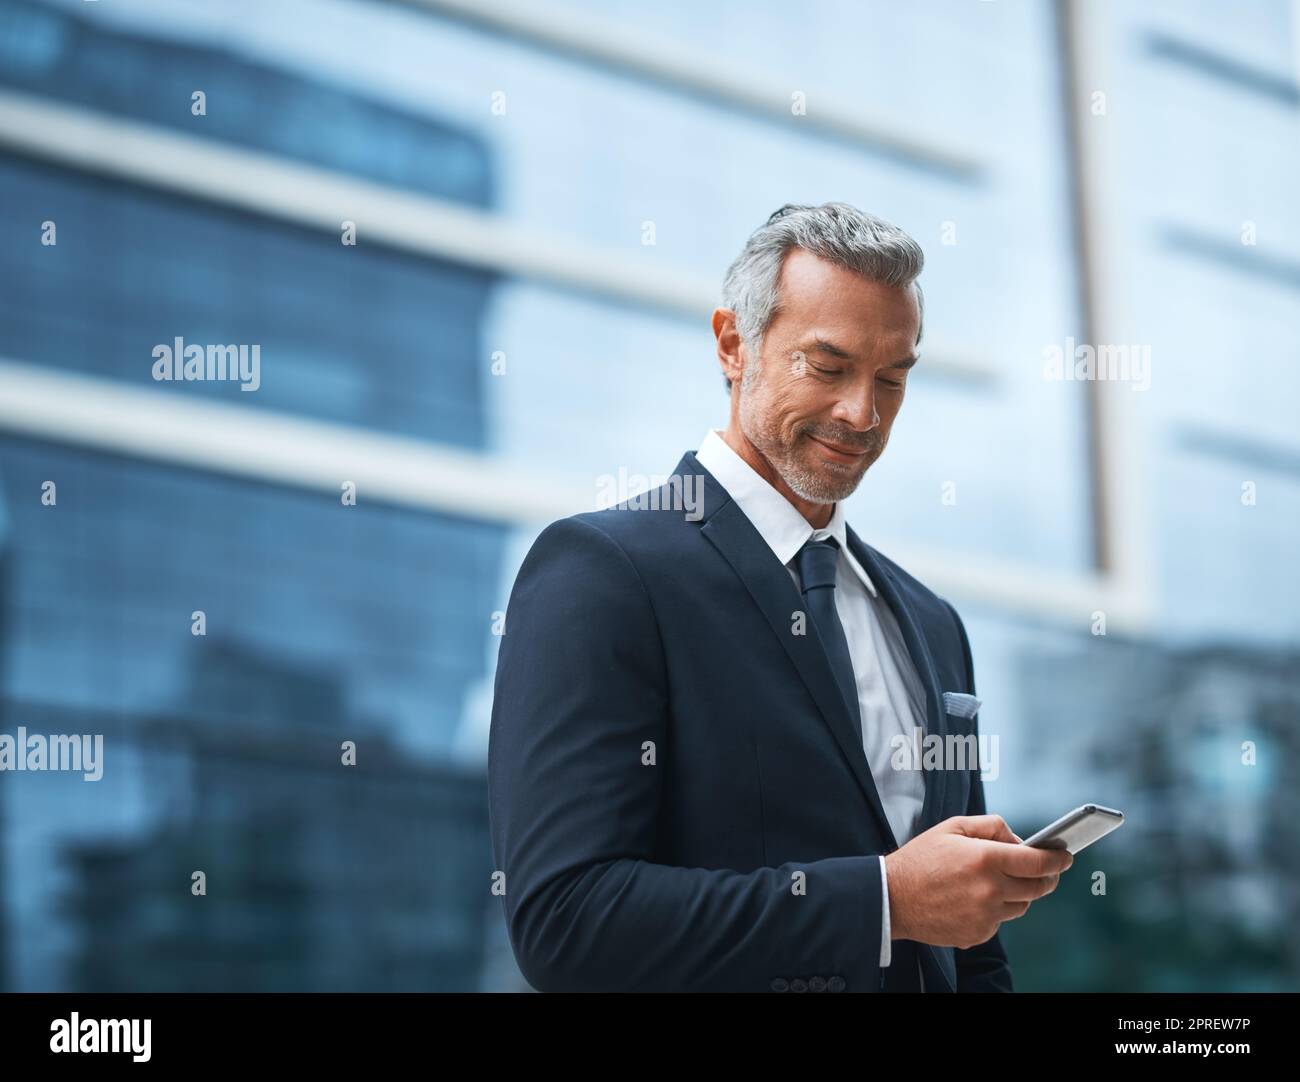 Always working, being a boss didnt come easy. a handsome mature businessman in corporate attire using a cellphone outside during the day. Stock Photo